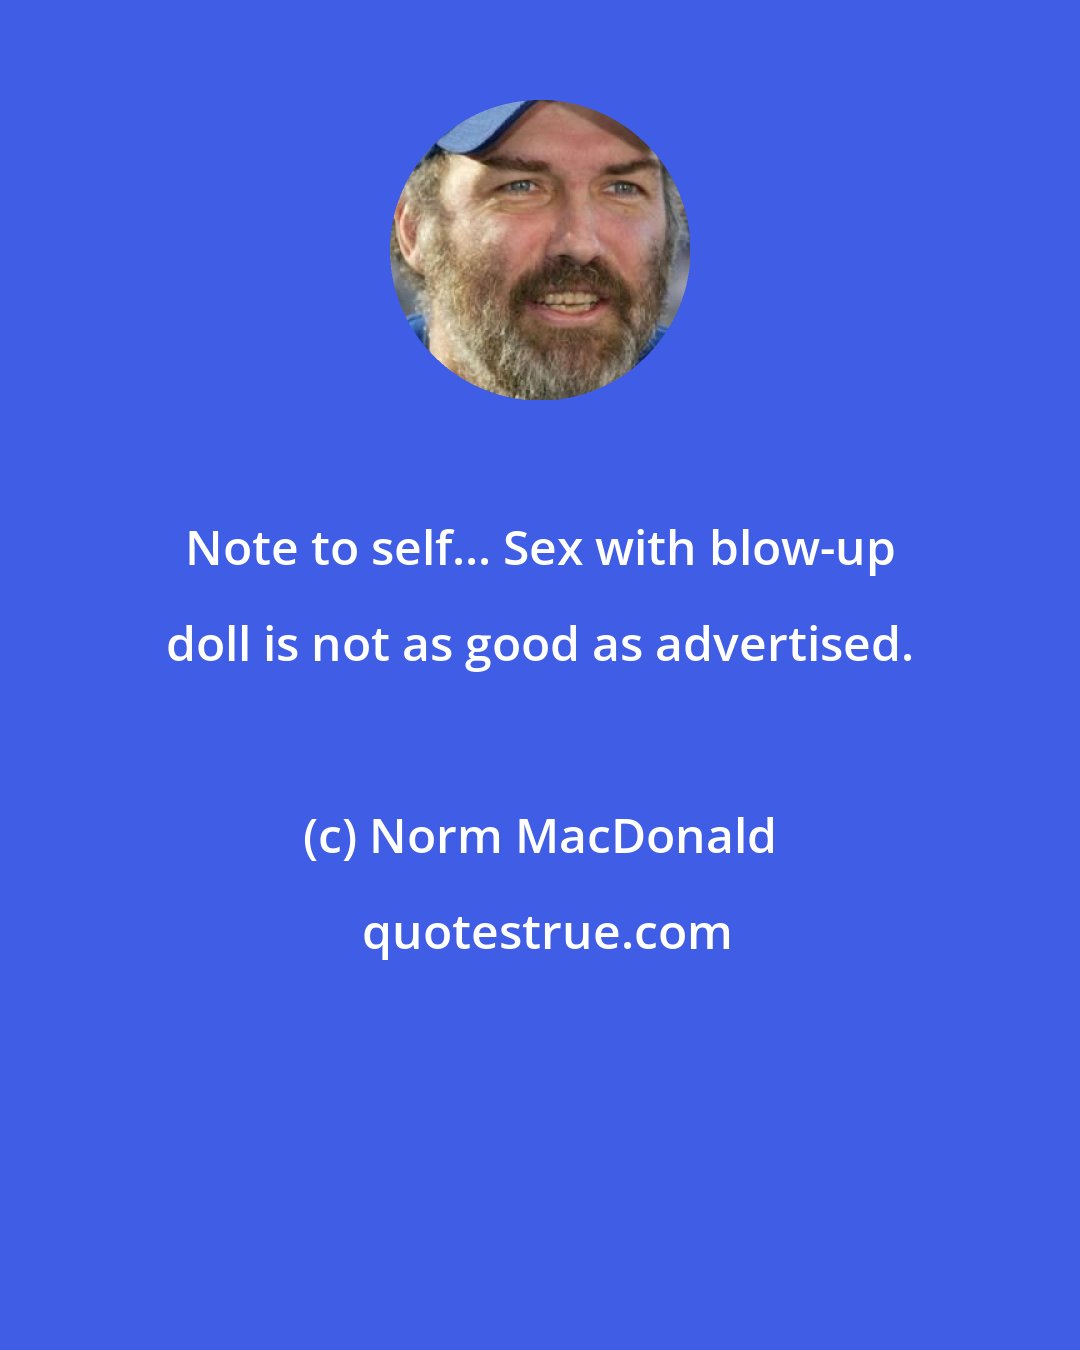 Norm MacDonald: Note to self... Sex with blow-up doll is not as good as advertised.